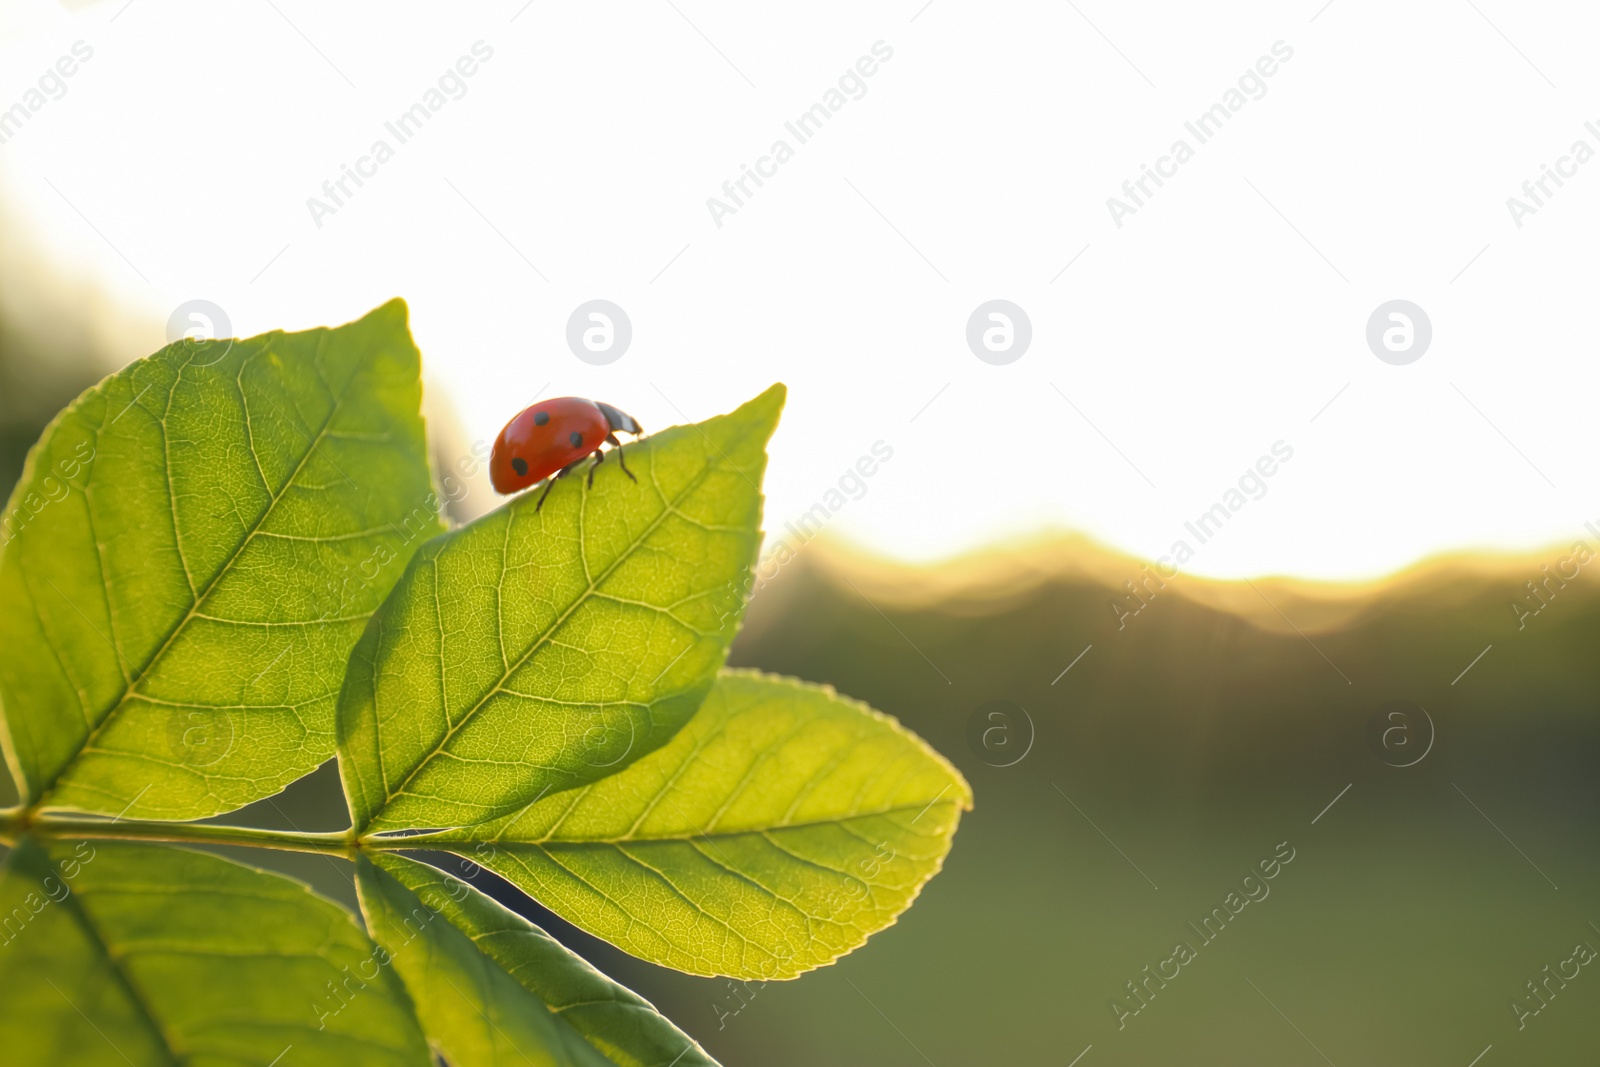 Photo of Ladybug on tree branch with young fresh green leaves outdoors. Spring season